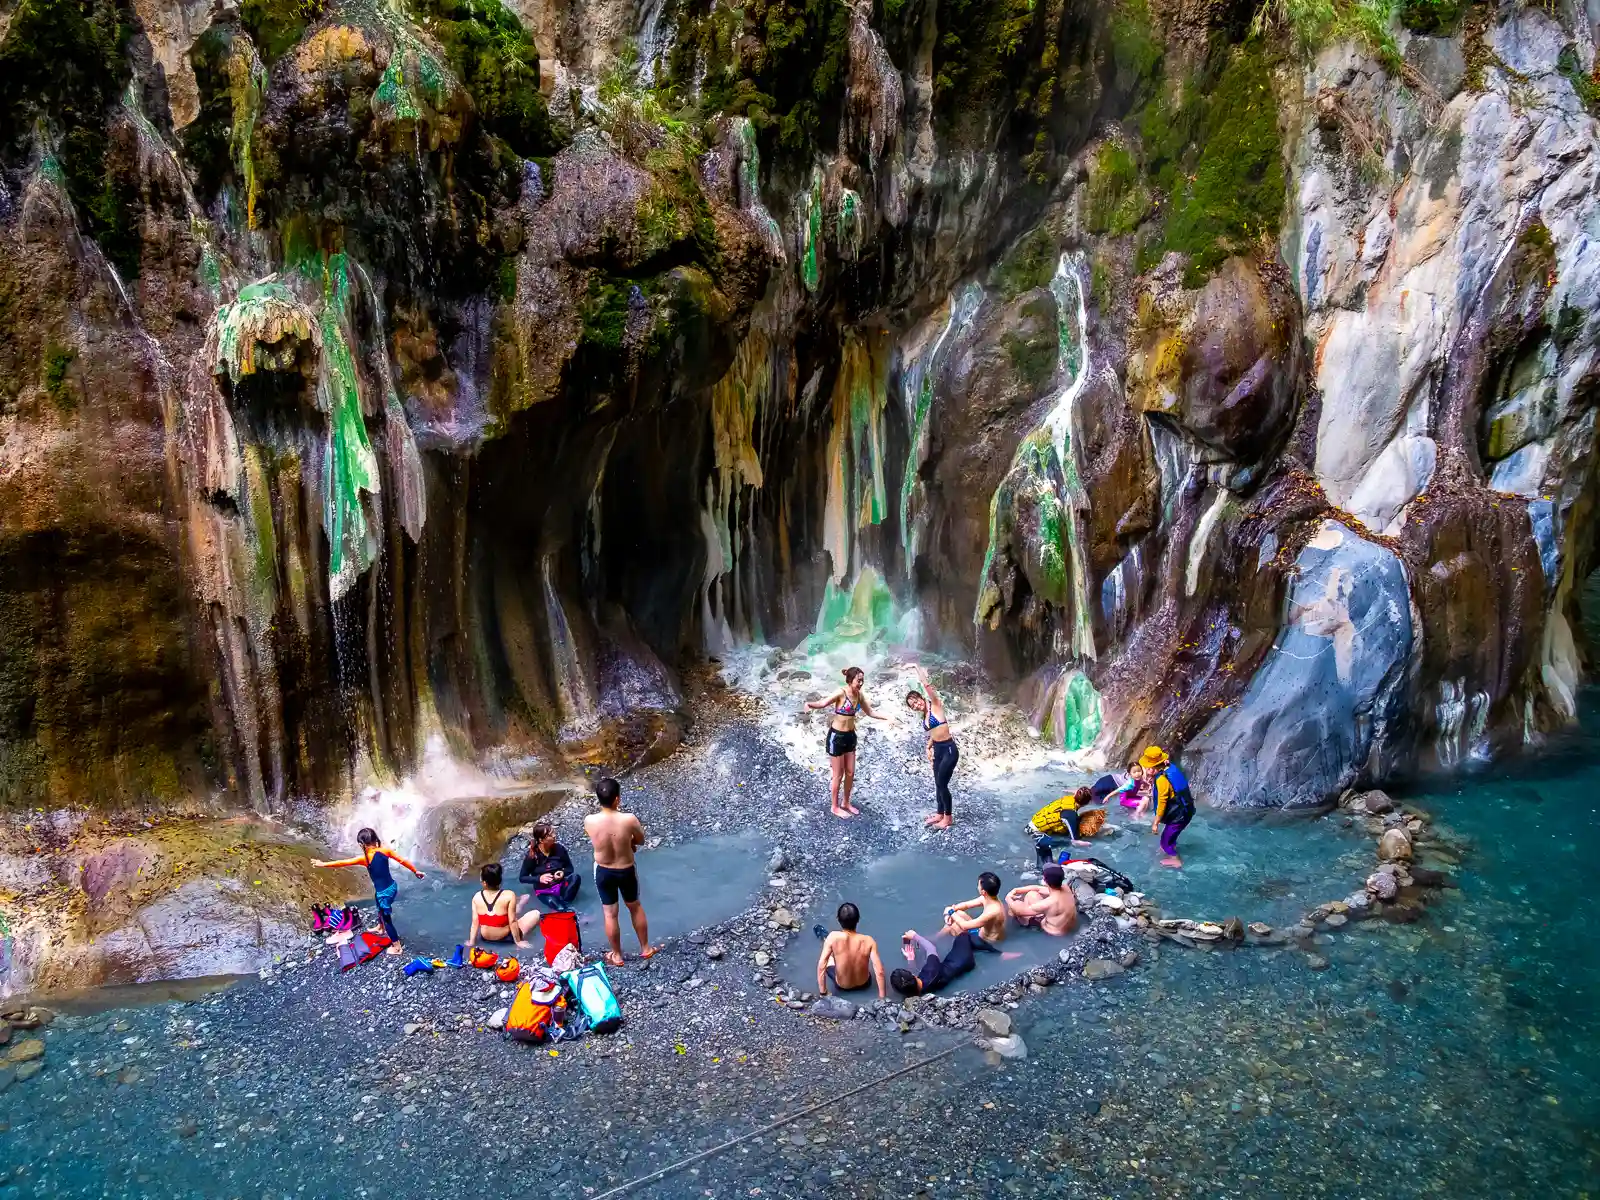 A group of tourists baths in hot spring pools below a colorful canyon wall.